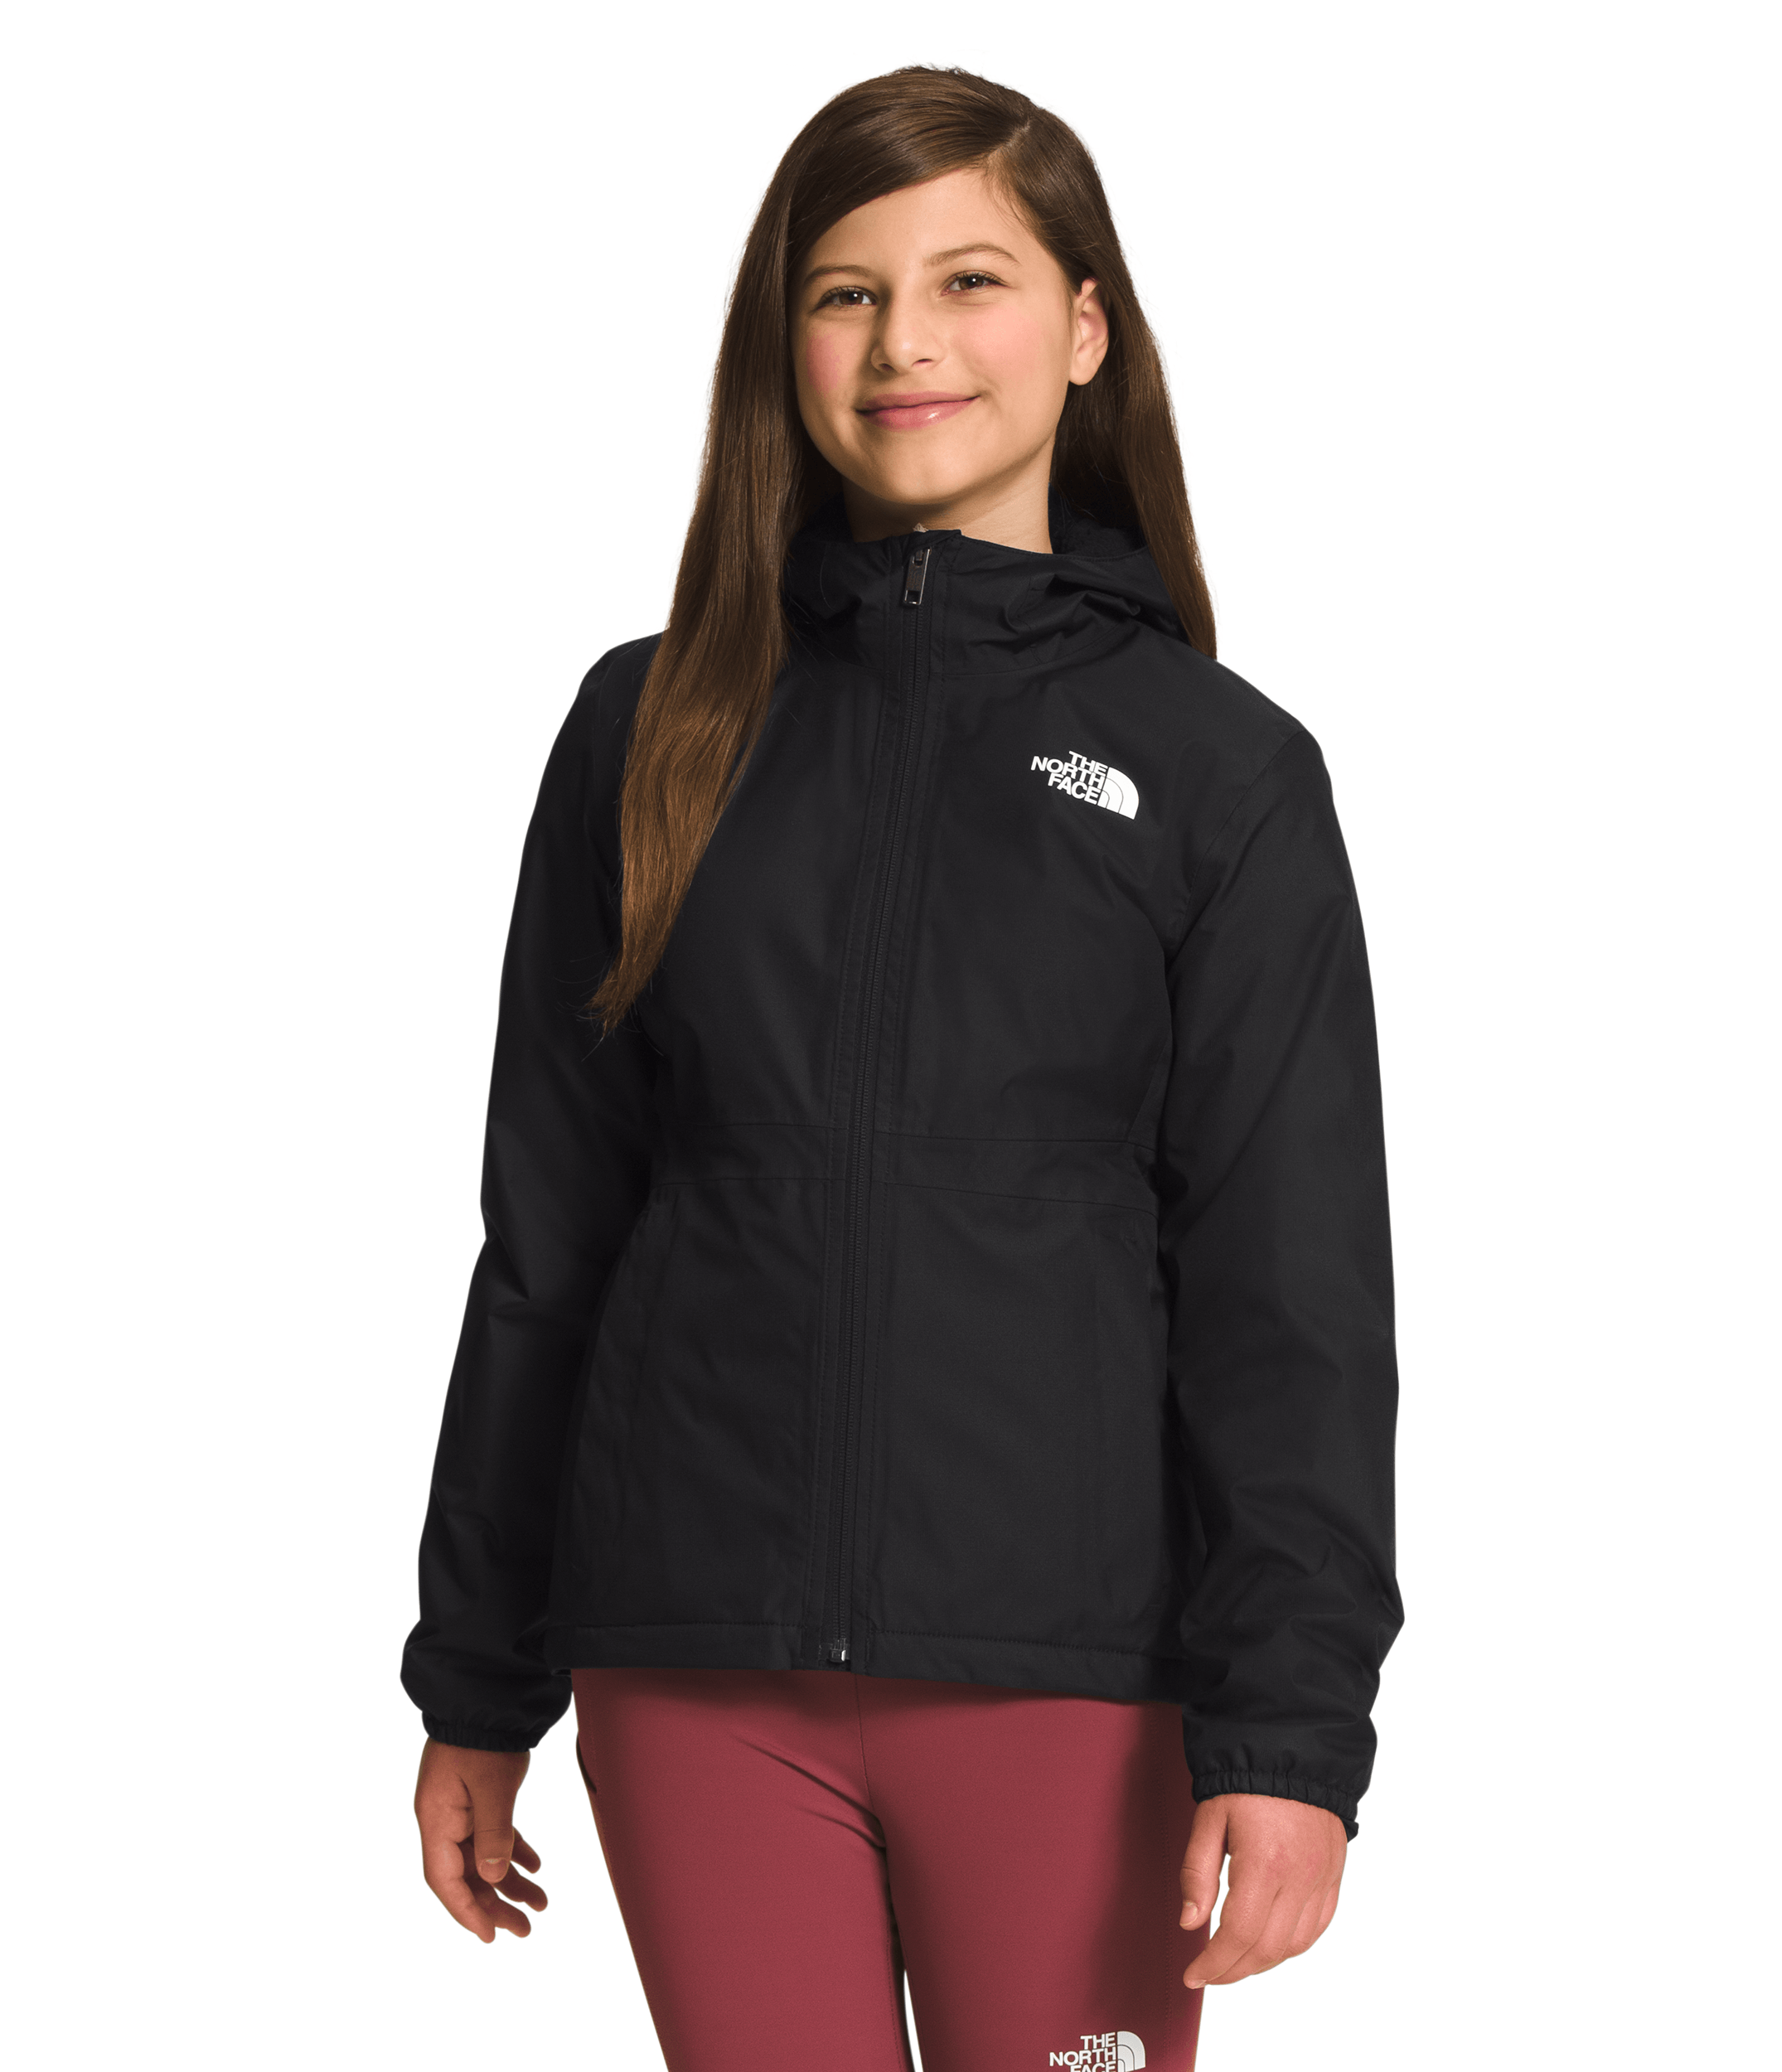 The North Face Girls' Warm Storm Jacket